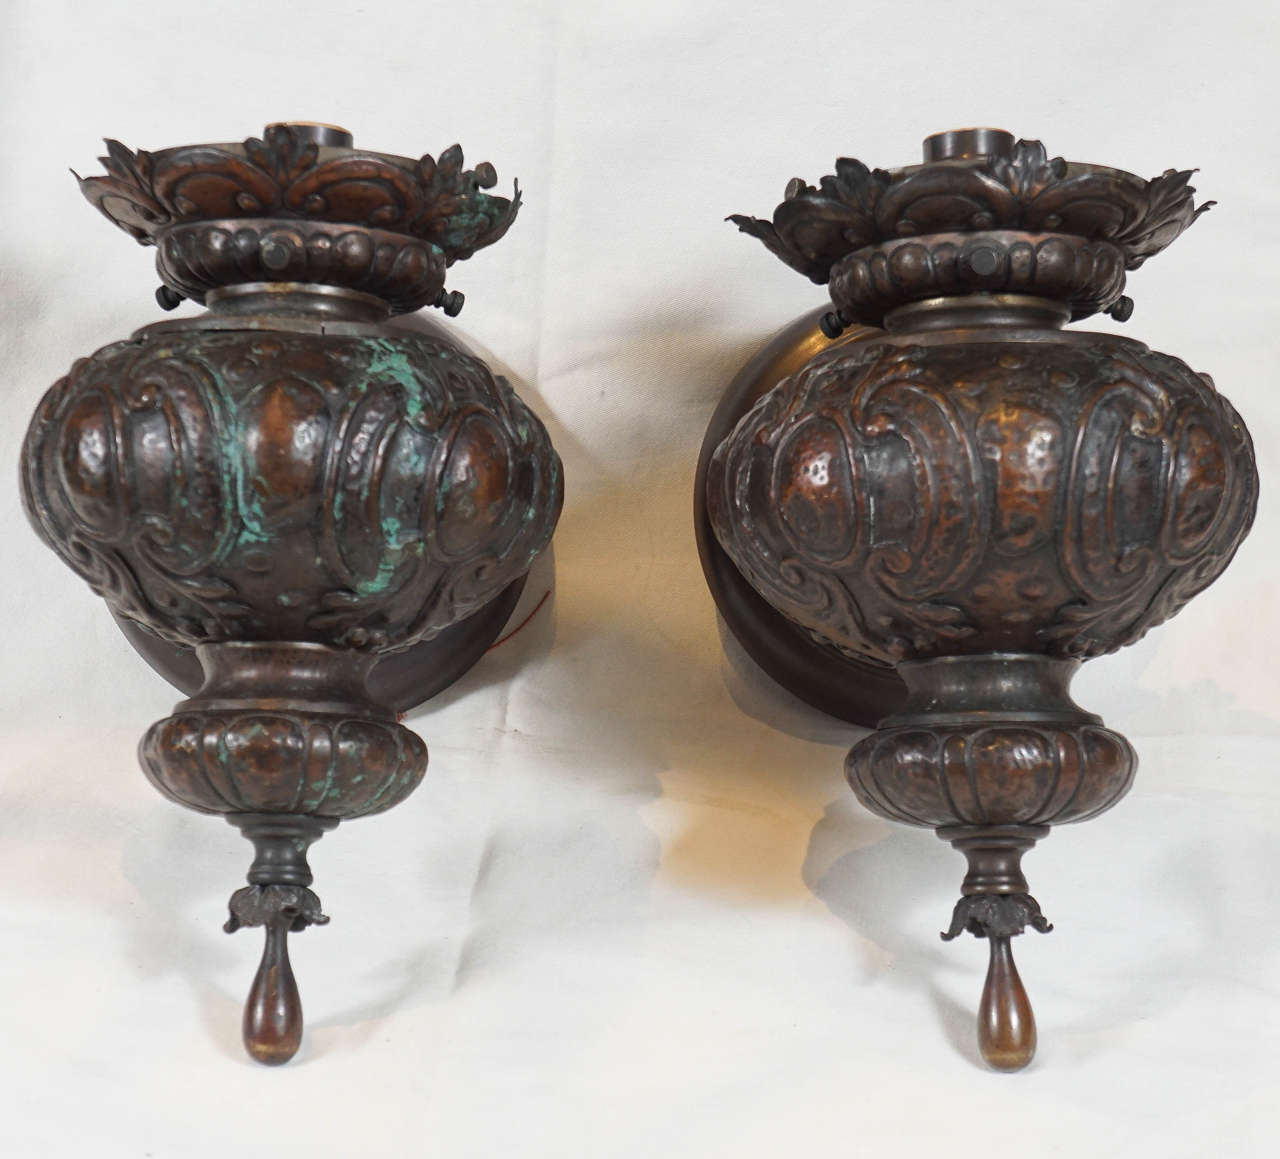 Rare early american electric sconces in the Renaissance revival style.  Beautiful form and proportion. Can take a flame shaped glass shade or a ball.